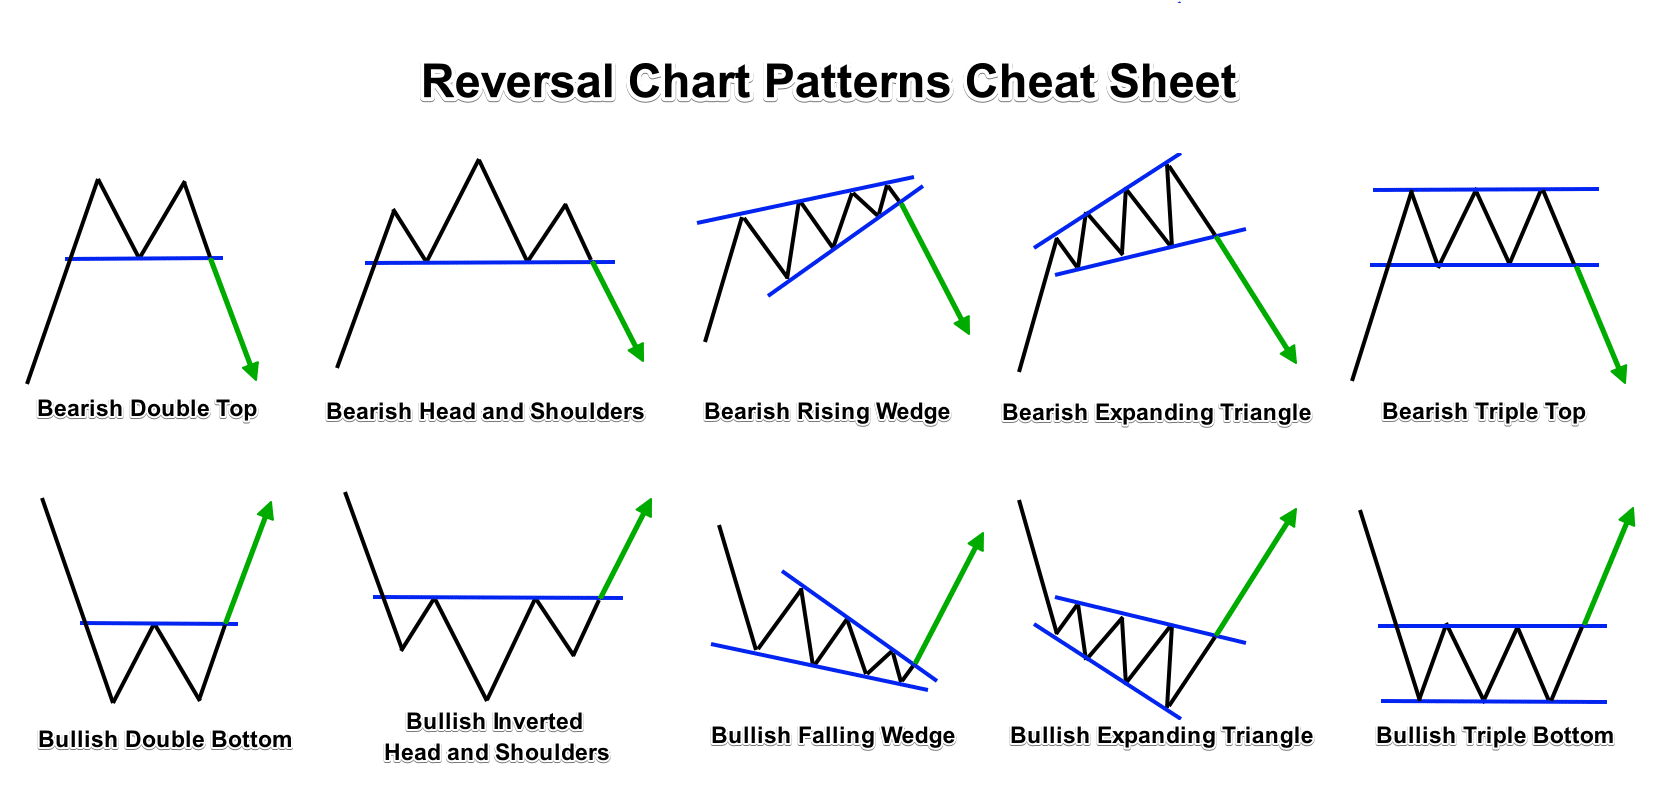 Forex Chart Patterns: Do They Work?